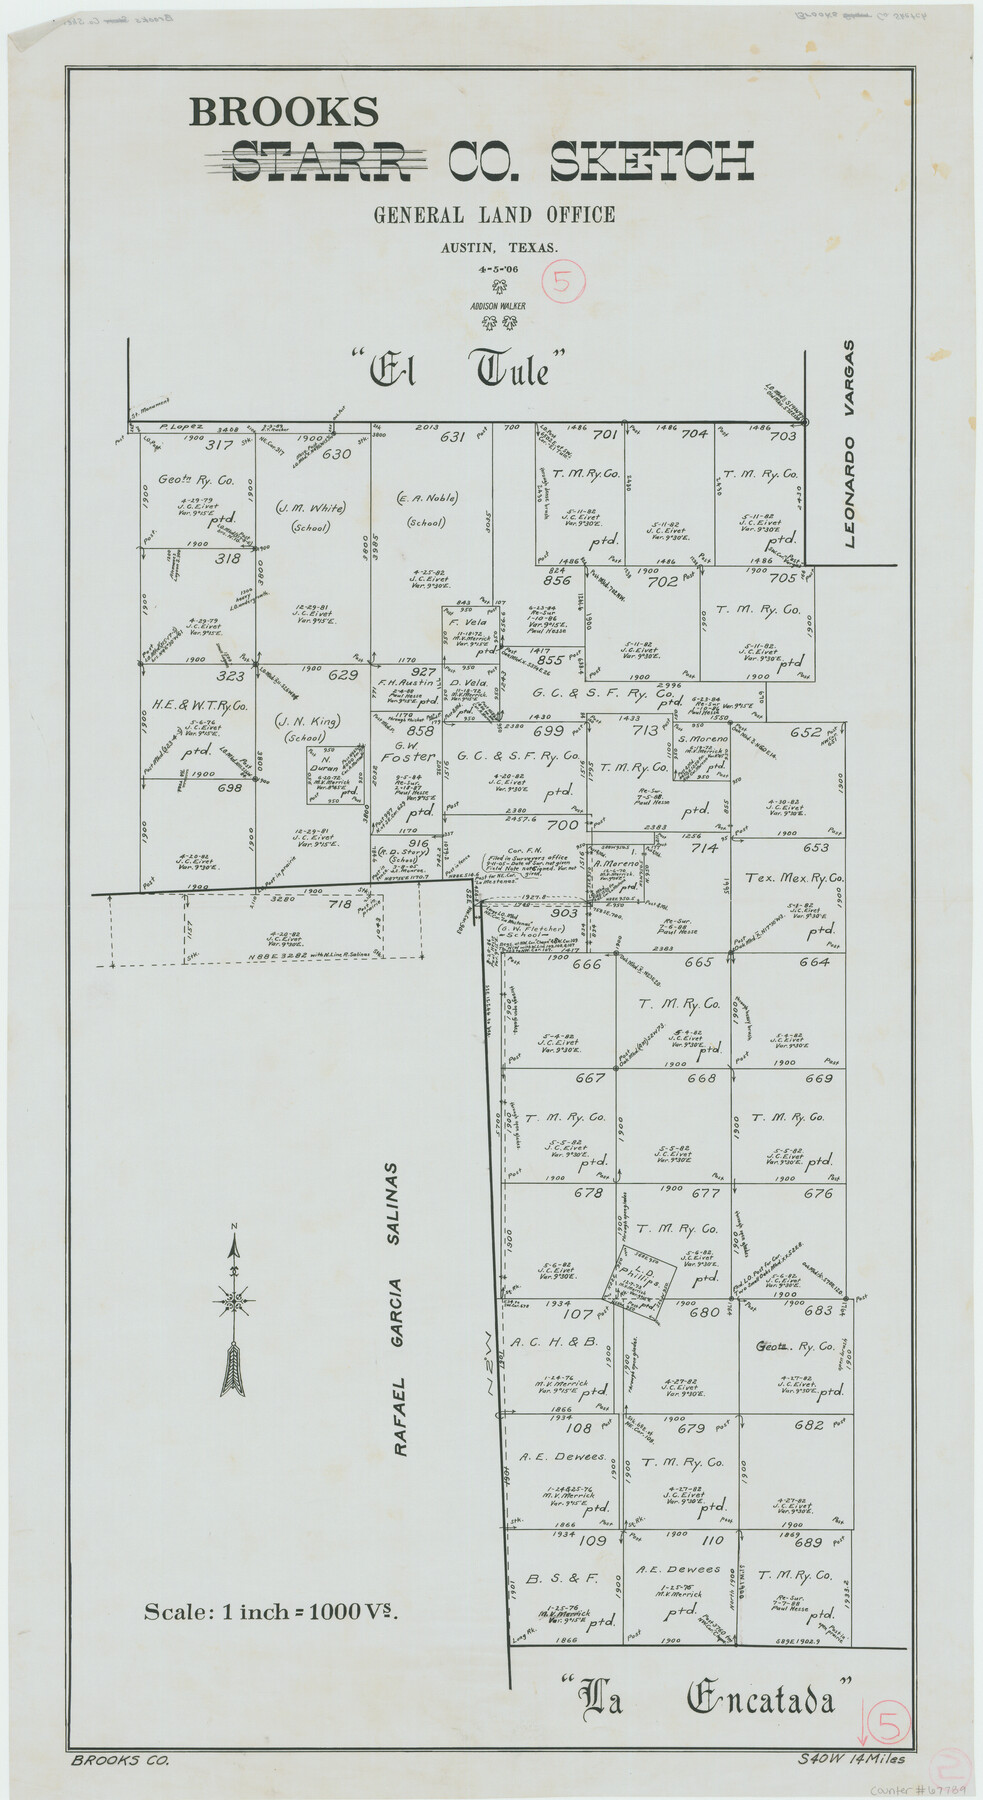 67789, Brooks County Working Sketch 5, General Map Collection